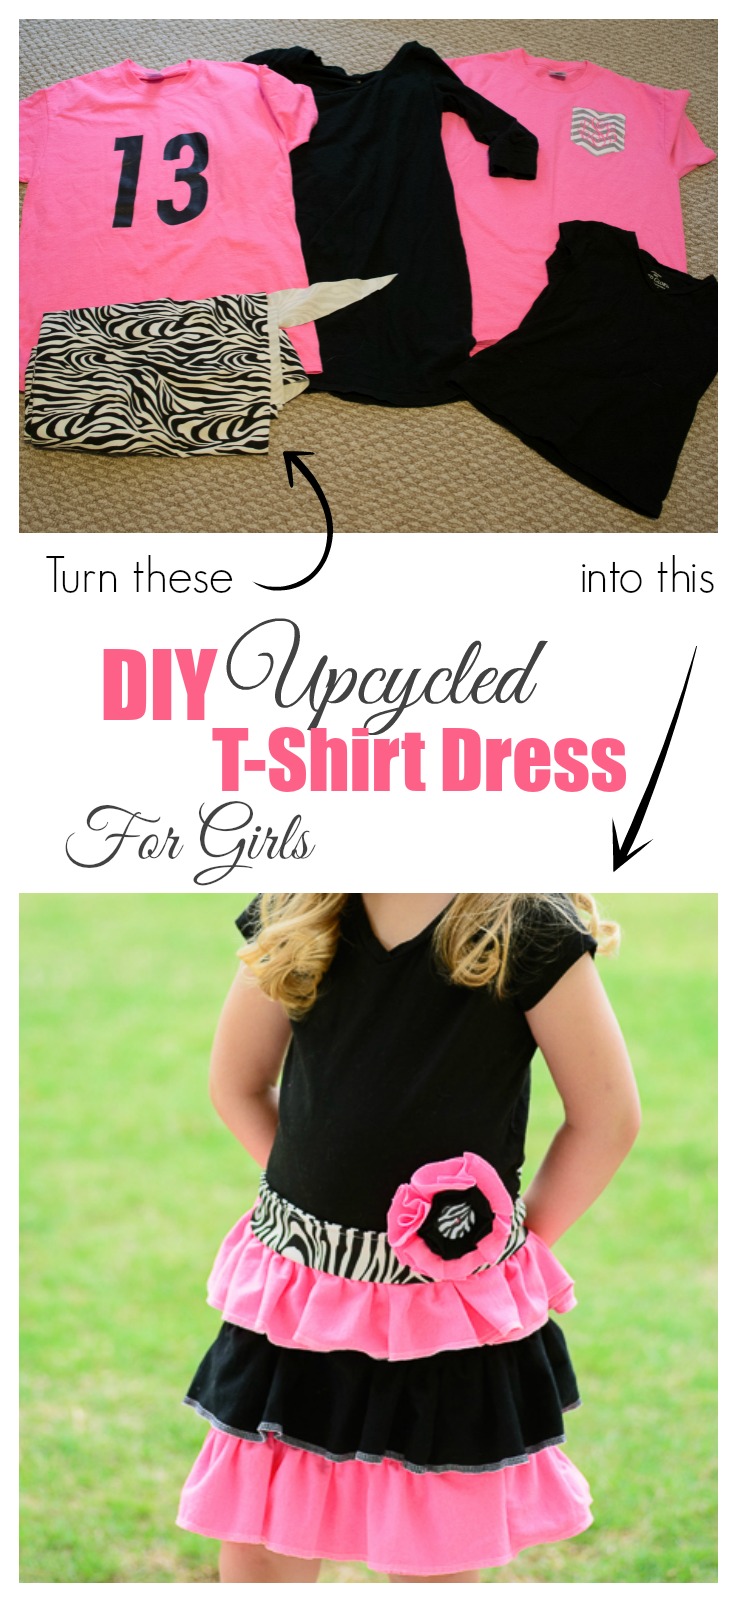 DIY Upcycled T-shirt Dress for Girls